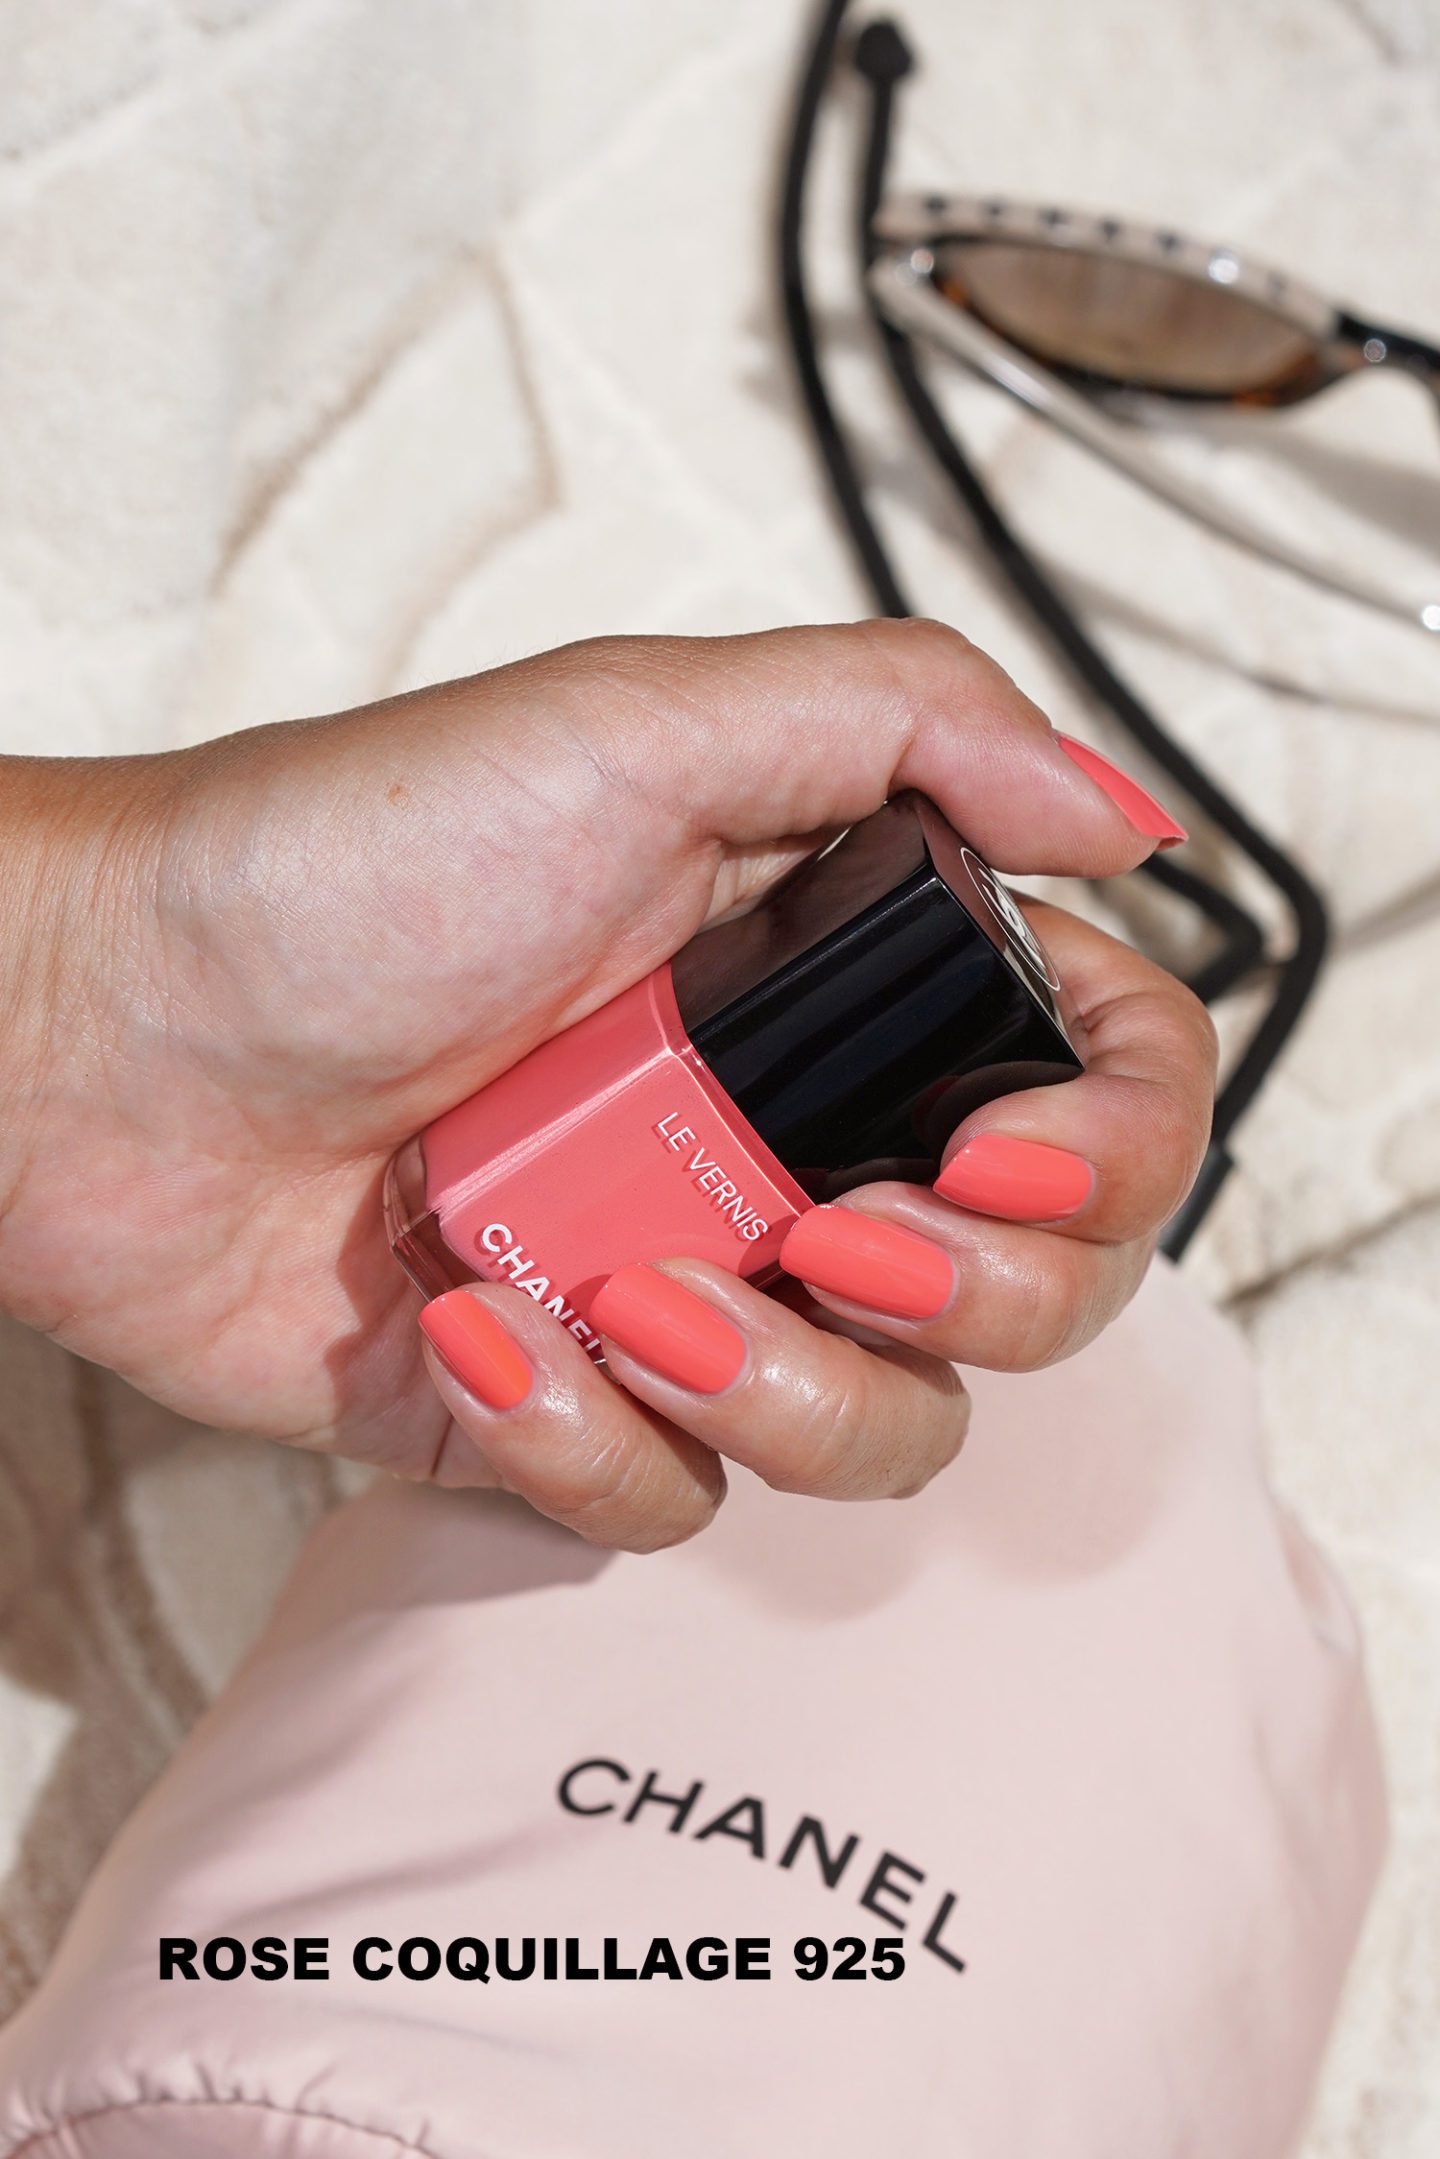 Chanel Le Vernis in Rose Coquillage 925 